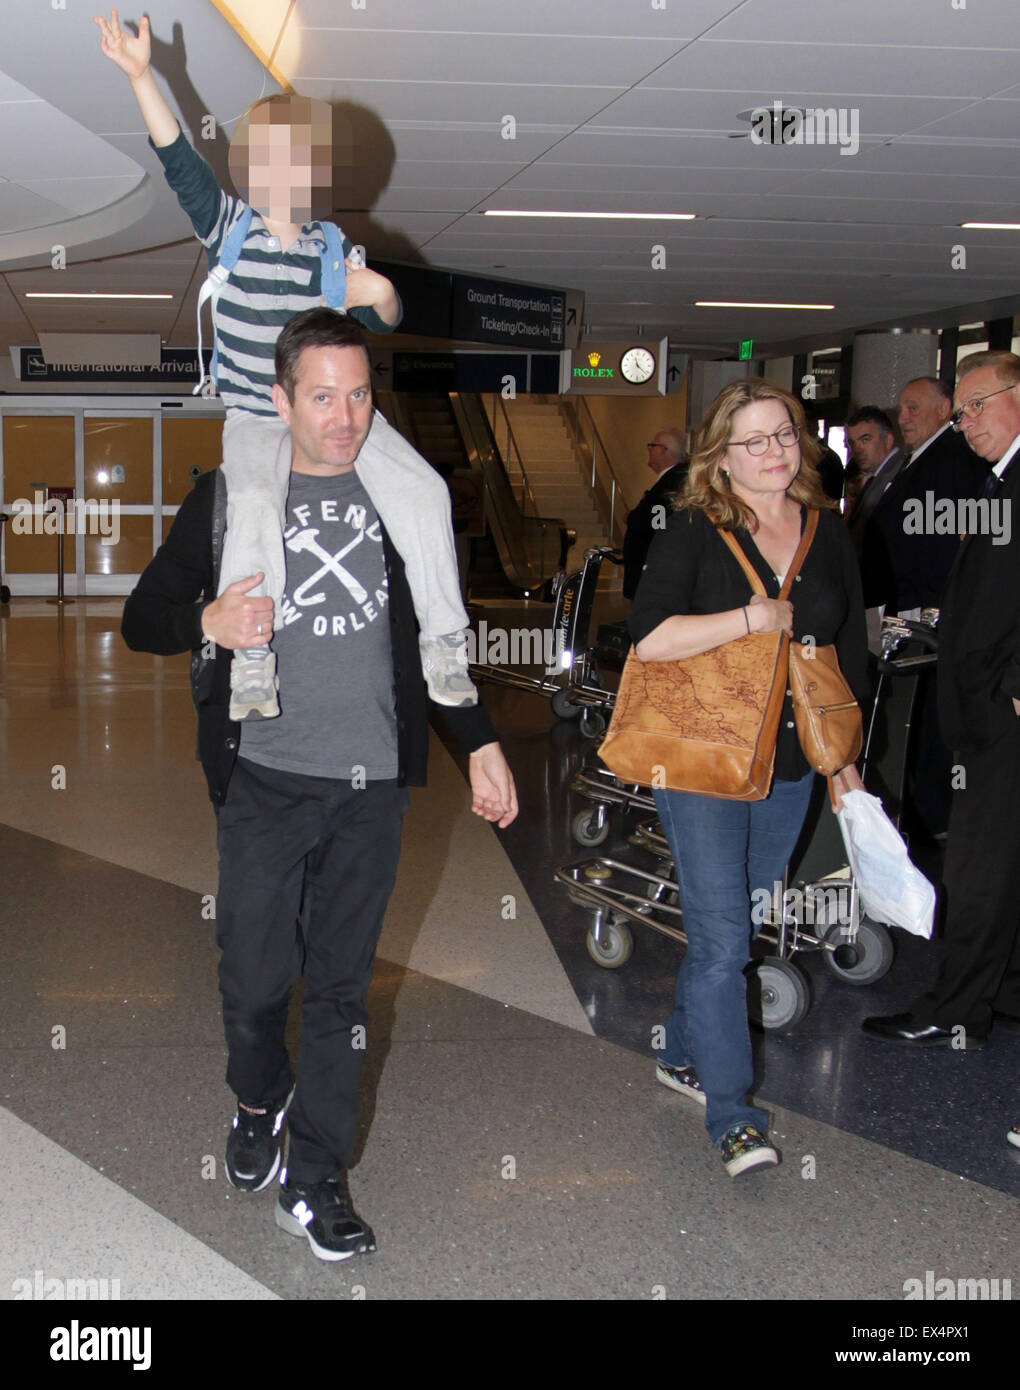 Thomas Lennon soon to be seen in an updated series of The Odd Couple, arrives at Los Angeles International Airport (LAX) with his family  Featuring: Thomas Lennon, Jenny Robertson, Oliver Lennon Where:  Los Angeles, California, United States When: 05 May 2015 C Stock Photo